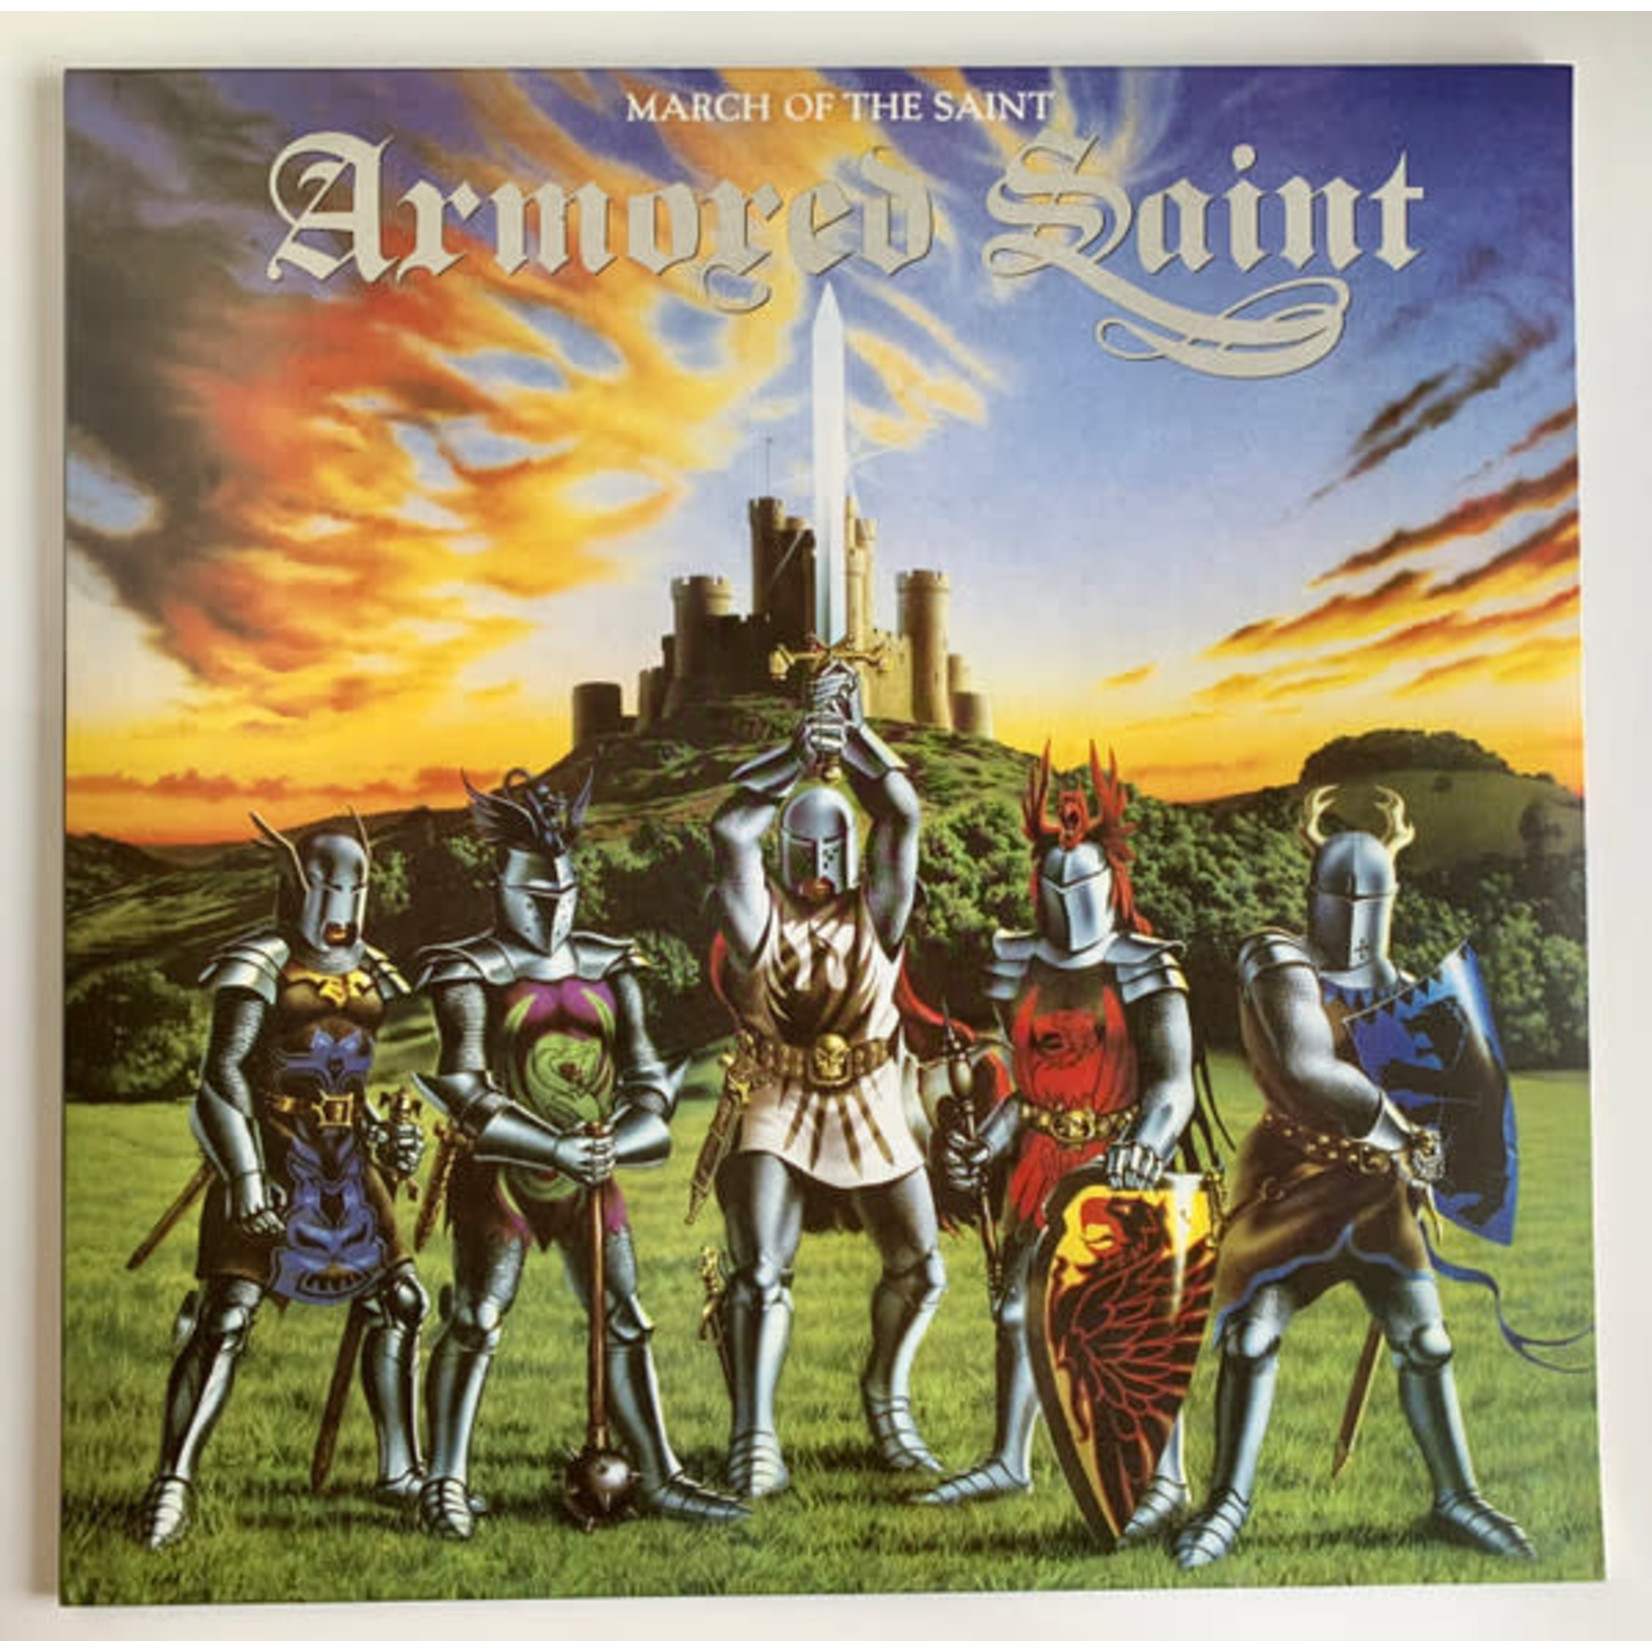 [New] Armored Saint - March Of The Saint (clear blue vinyl)